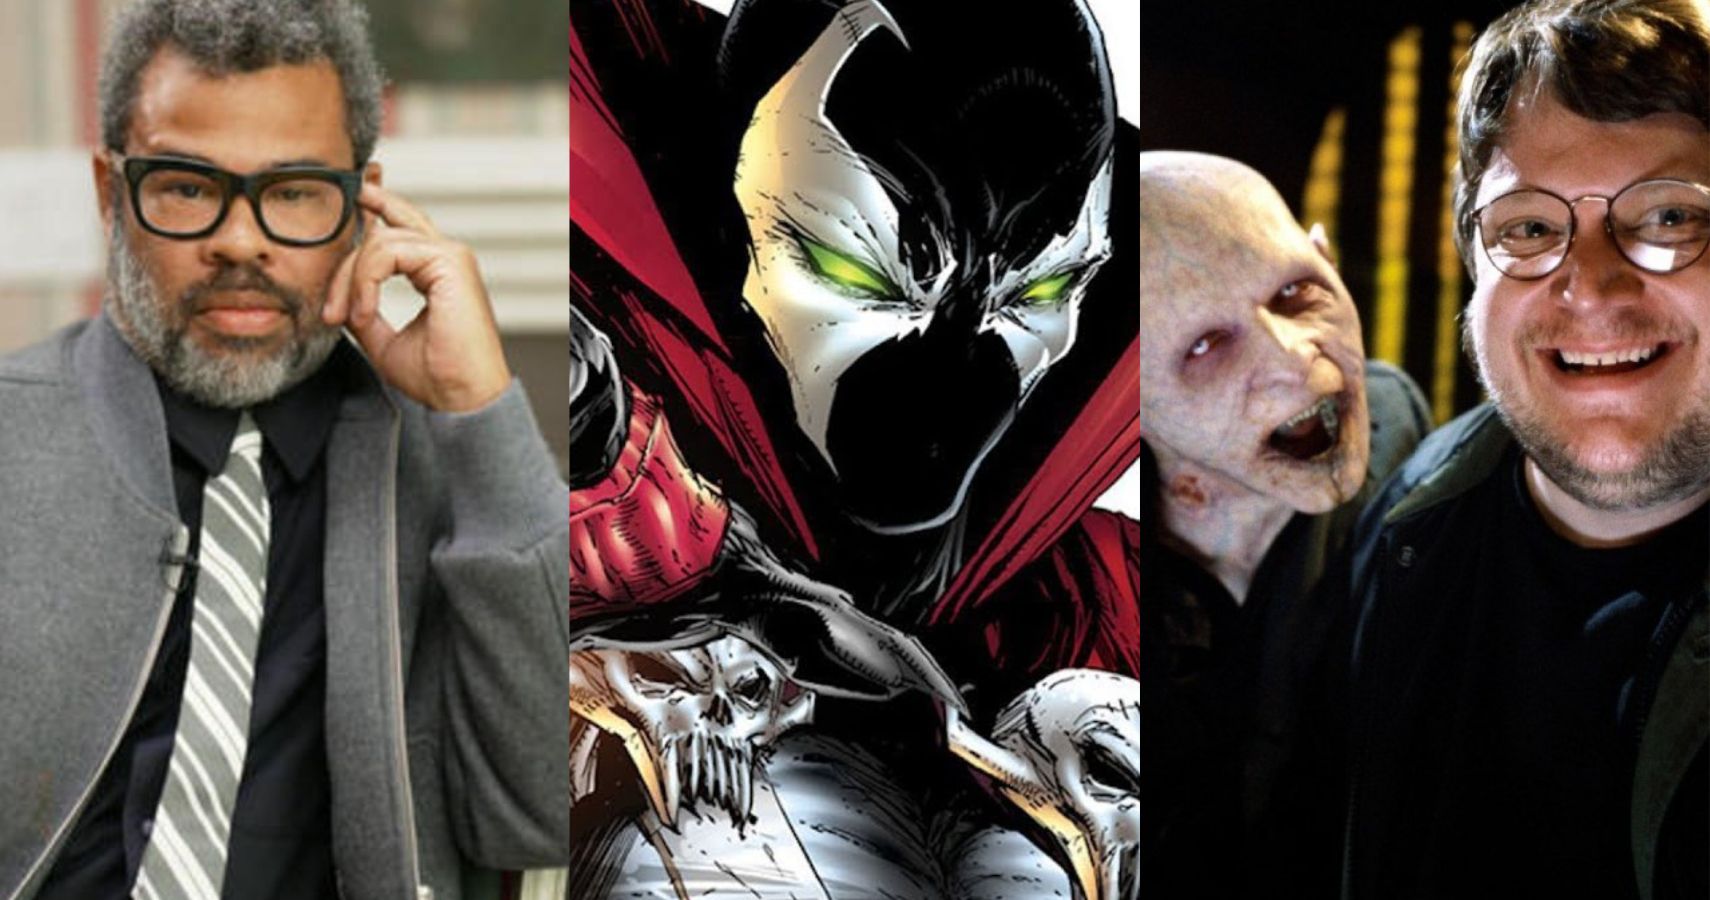 A combined feature image of the character of Spawn next to directors Jordan Peele and Guillermo del Toro.